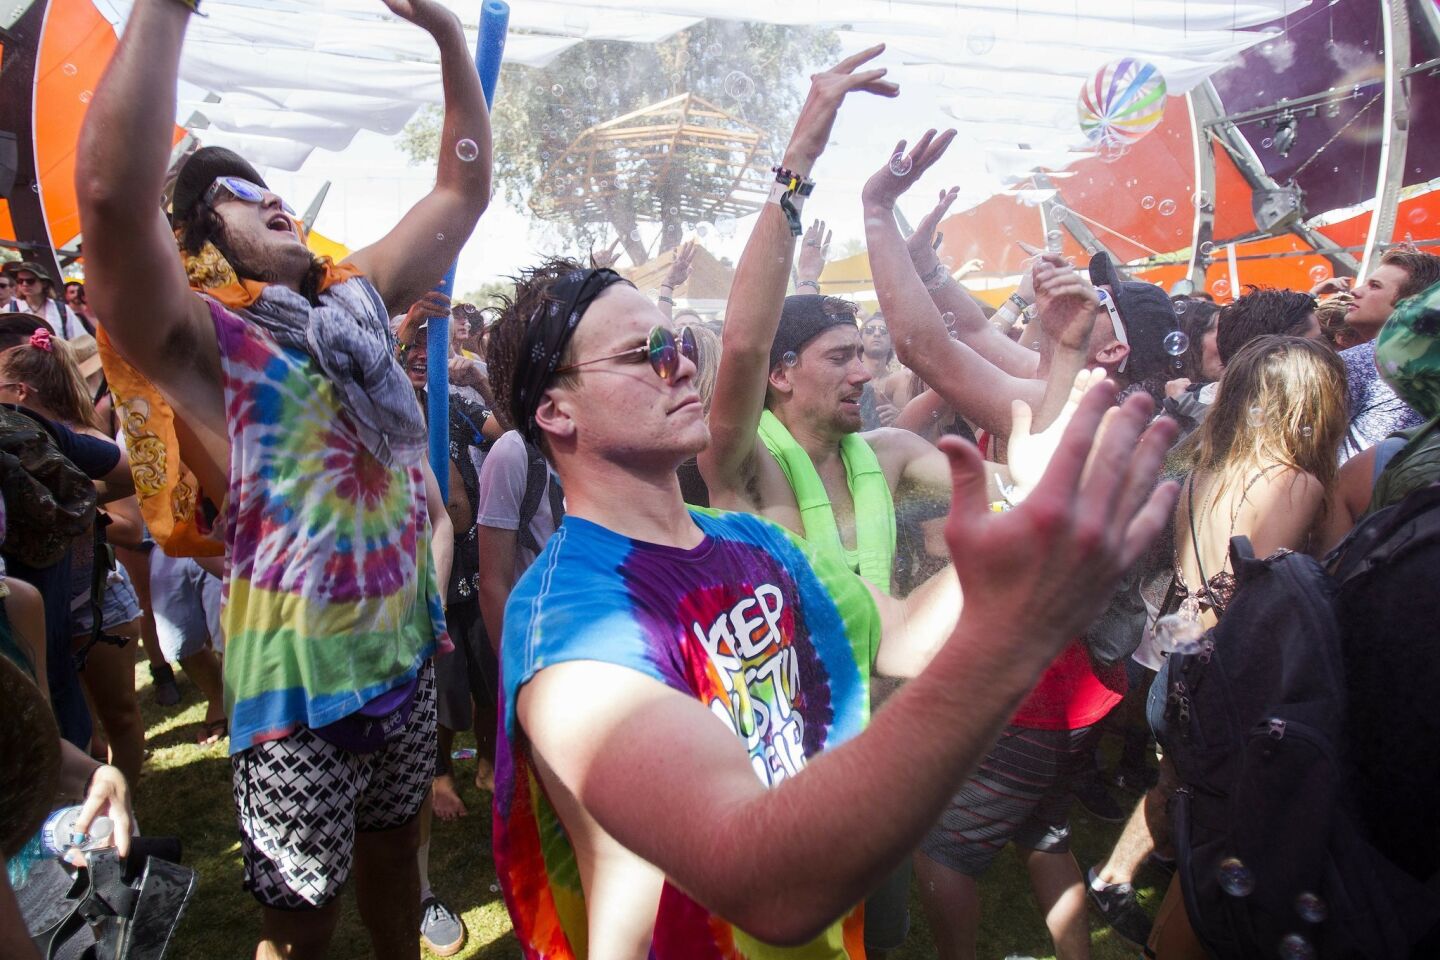 The 2015 Coachella Valley Music and Arts Festival gets underway. The Do Lab gets an early start as Coachella gets underway. Festival goers dance to pounding bass while being doused with water.